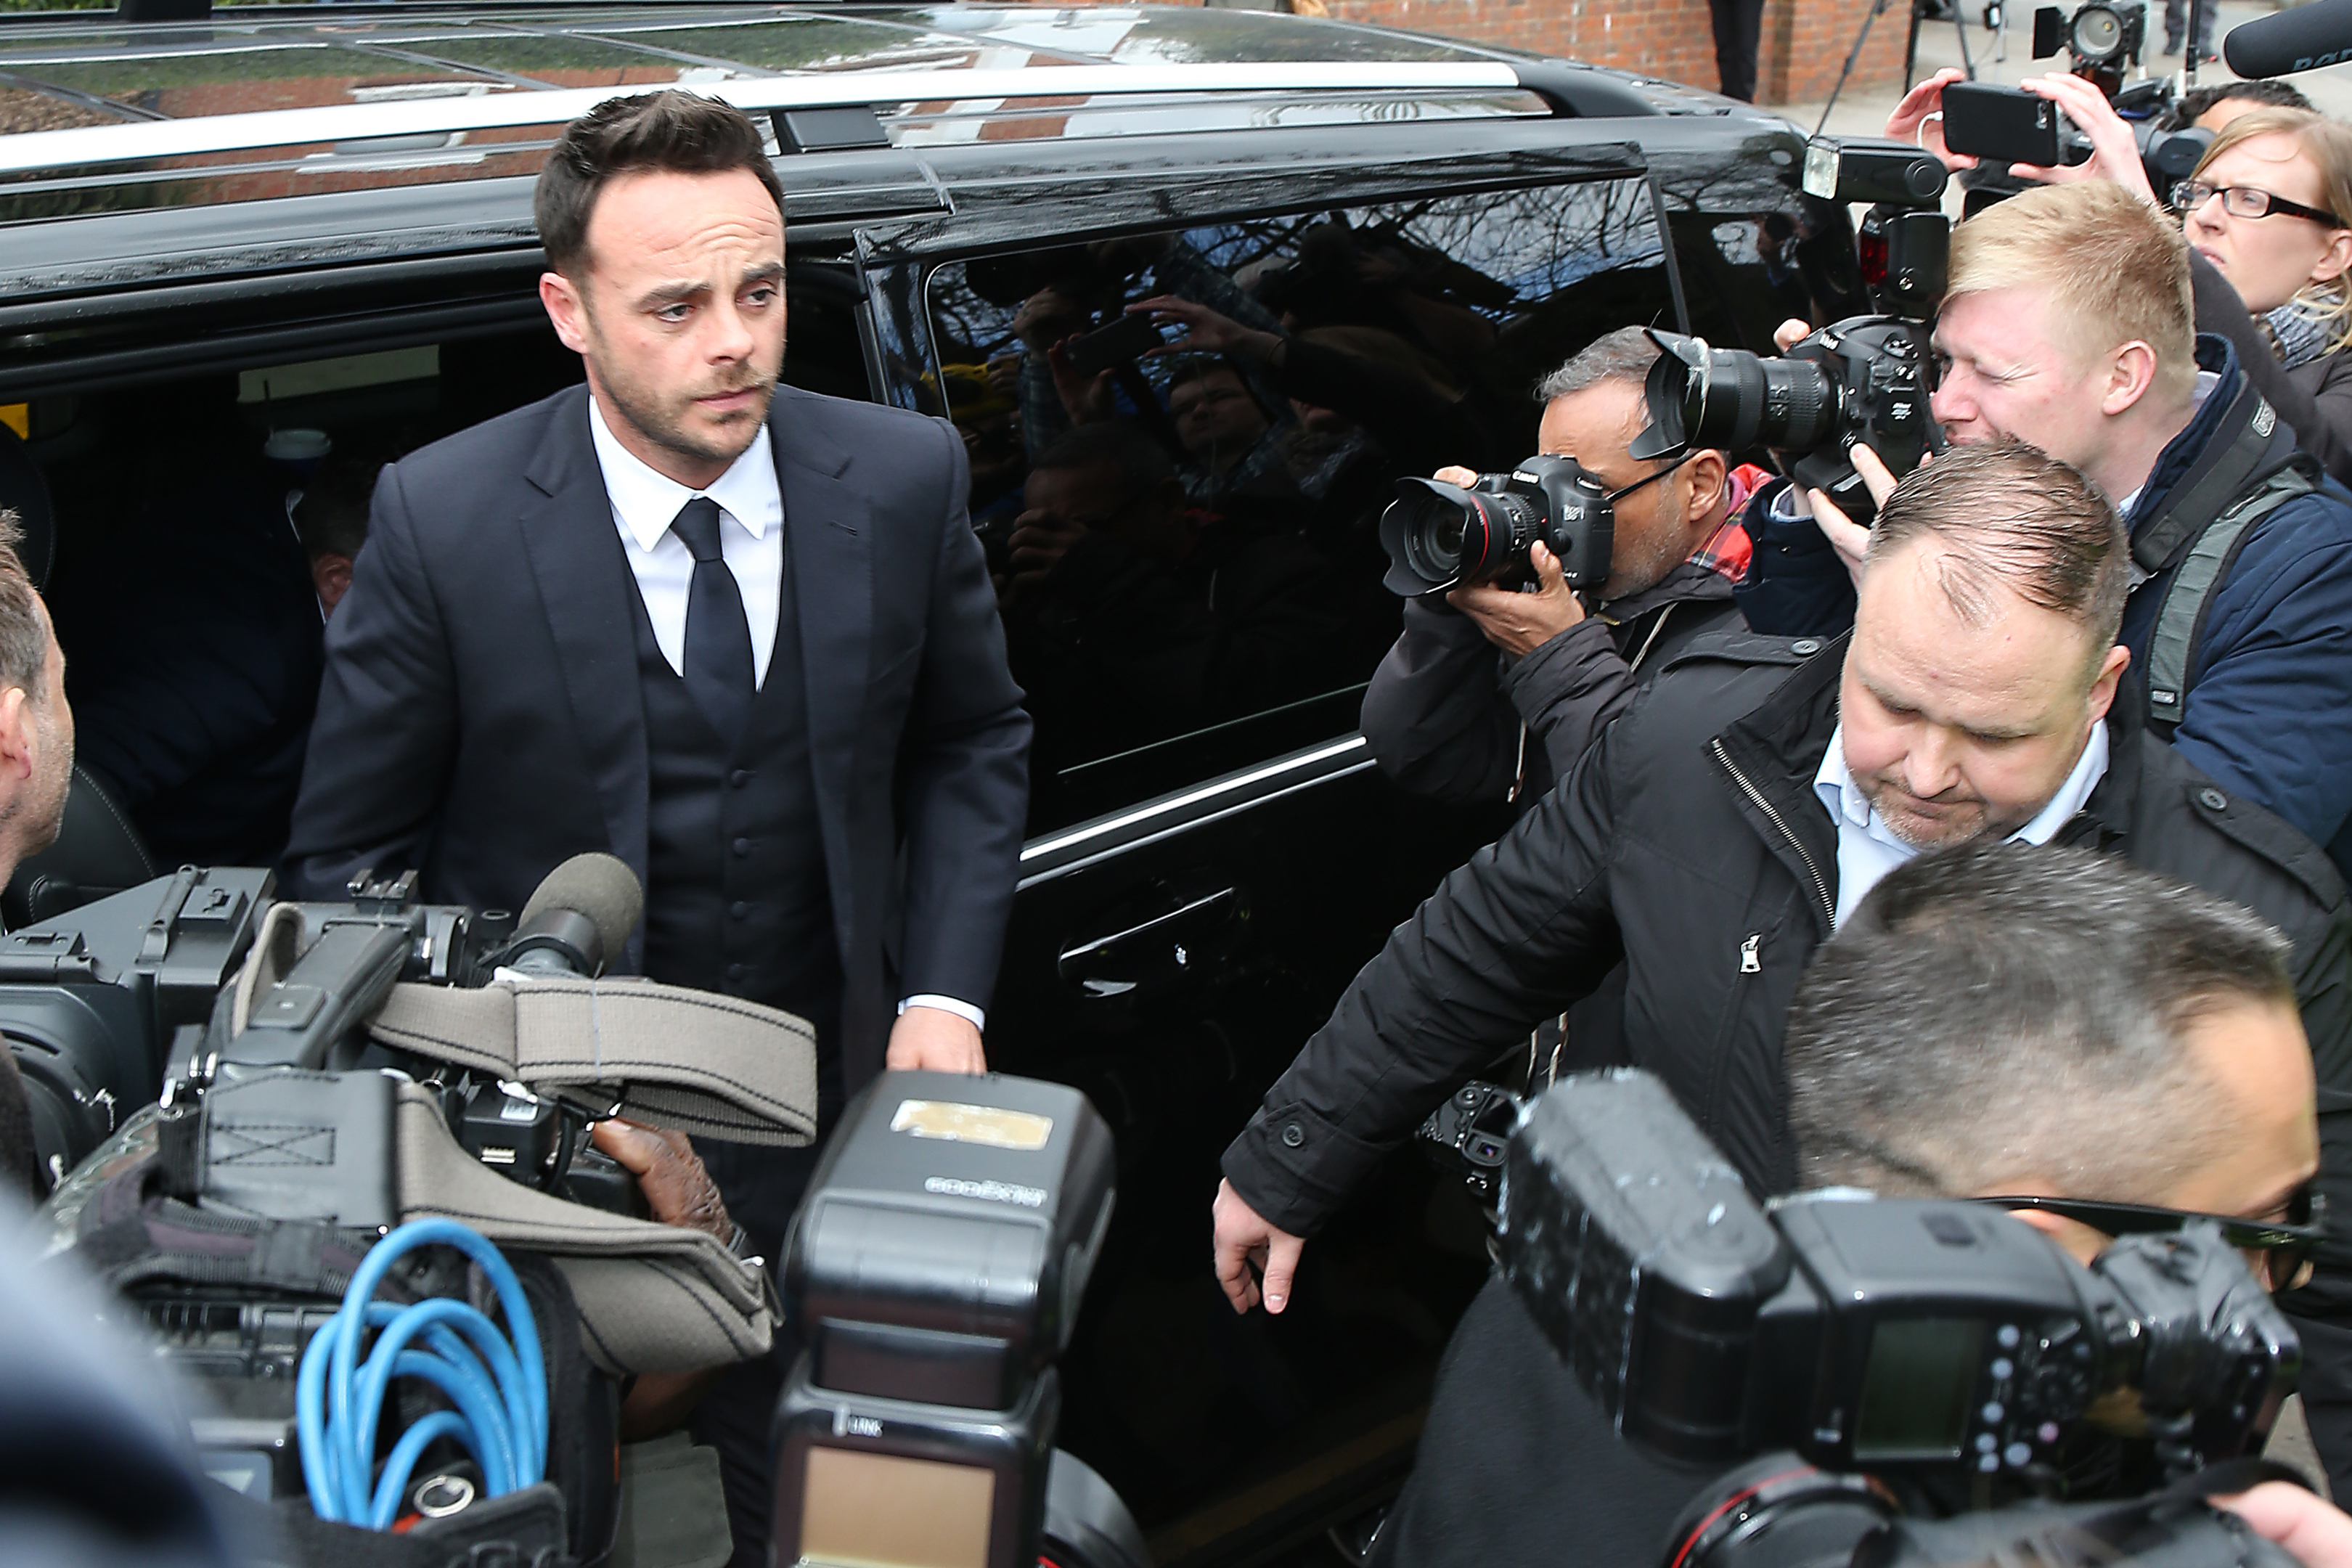 Anthony McPartlin, one half of the television presenting duo Ant and Dec, appears in court charged with drink-driving following a three car collision on March 18 2018.  Photo by Neil P. Mockford/GC Images.